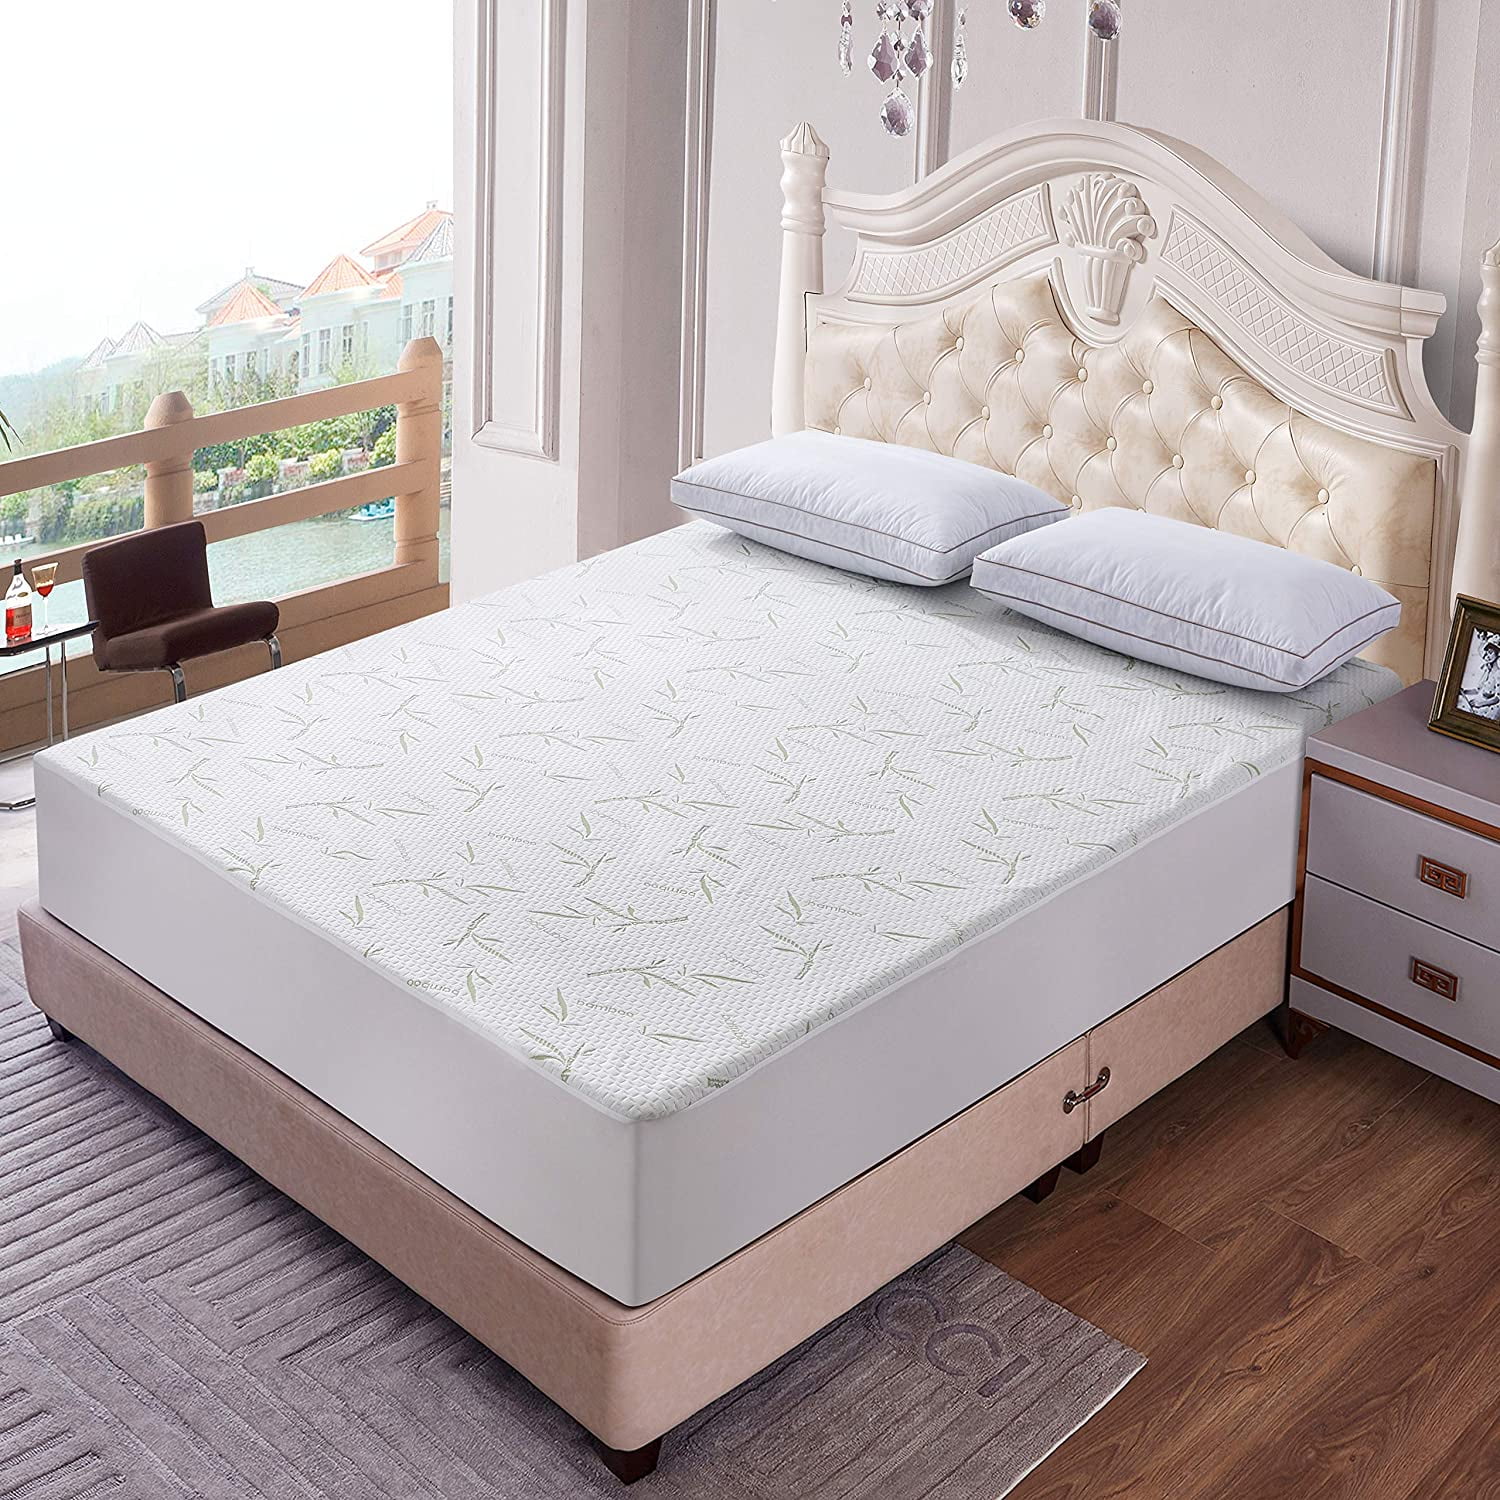 Utopia Bedding Premium Bamboo Waterproof Mattress Protector Full 340 GSM,  Fits 15 Inches Deep, Easy Care - Maple City Timepieces